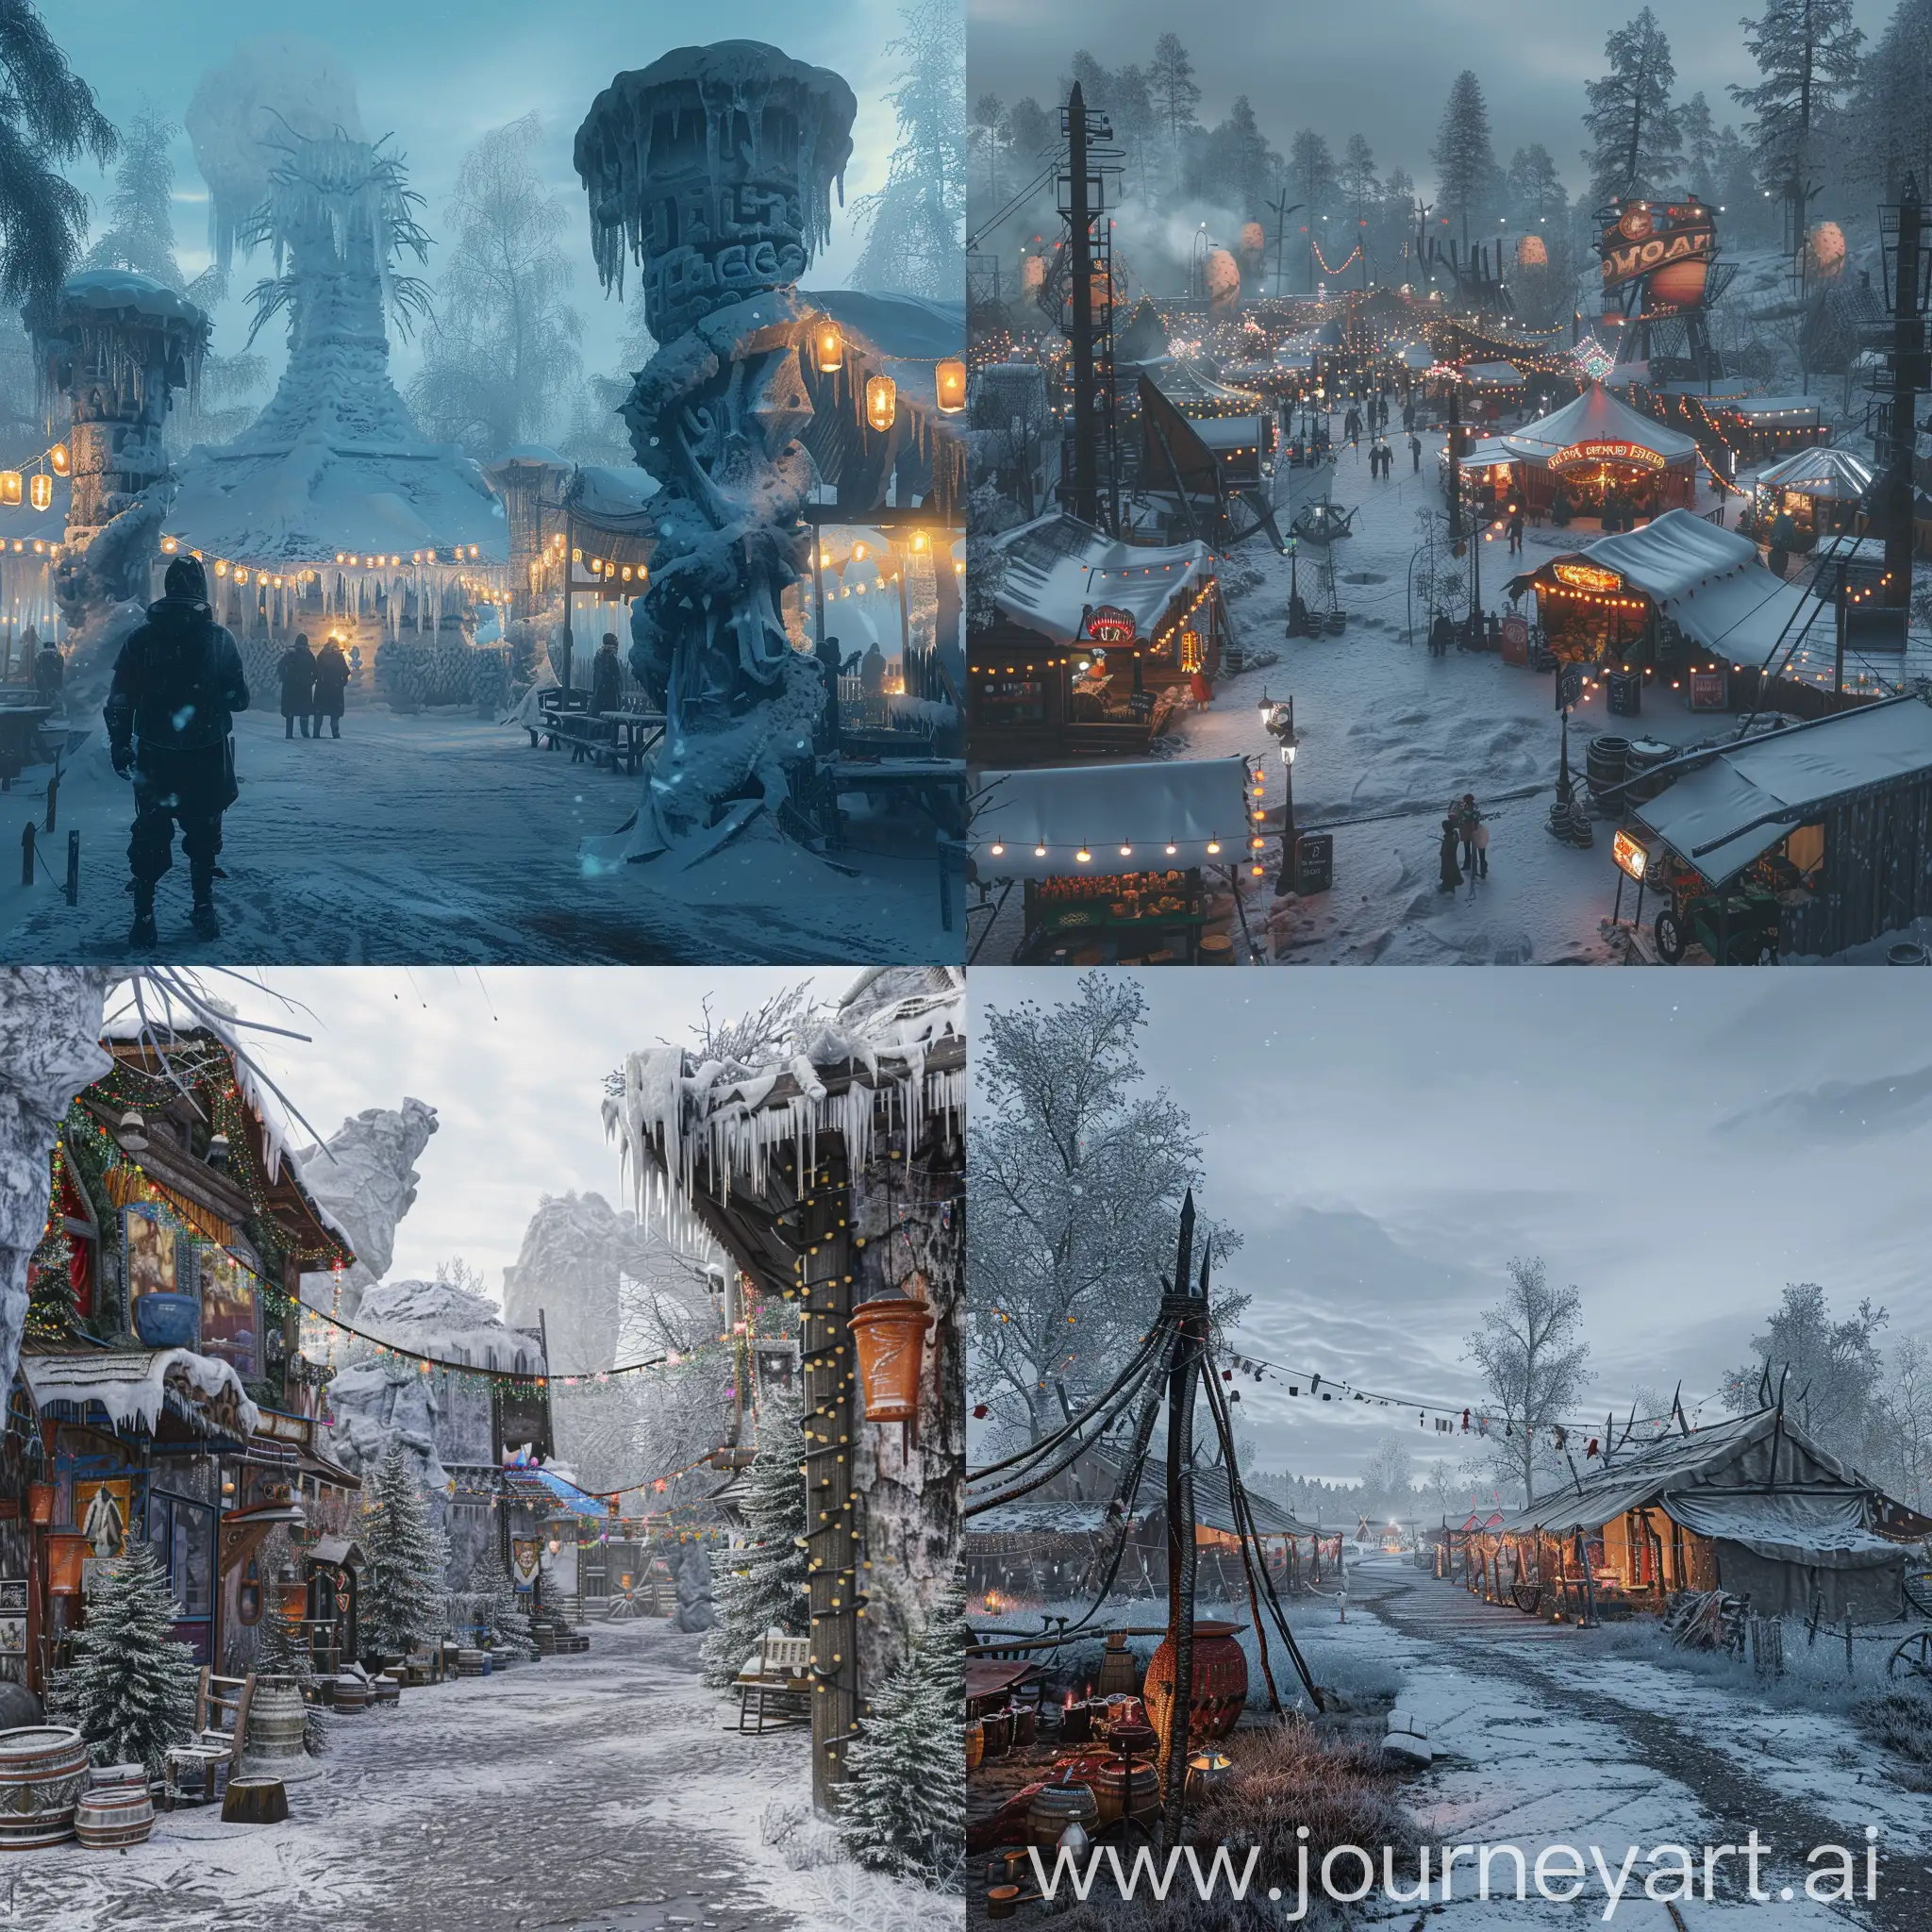 Frozen-Man-Festival-Realistic-HighQuality-Ultra-Textures-DLC-RTS-Photographic-Art